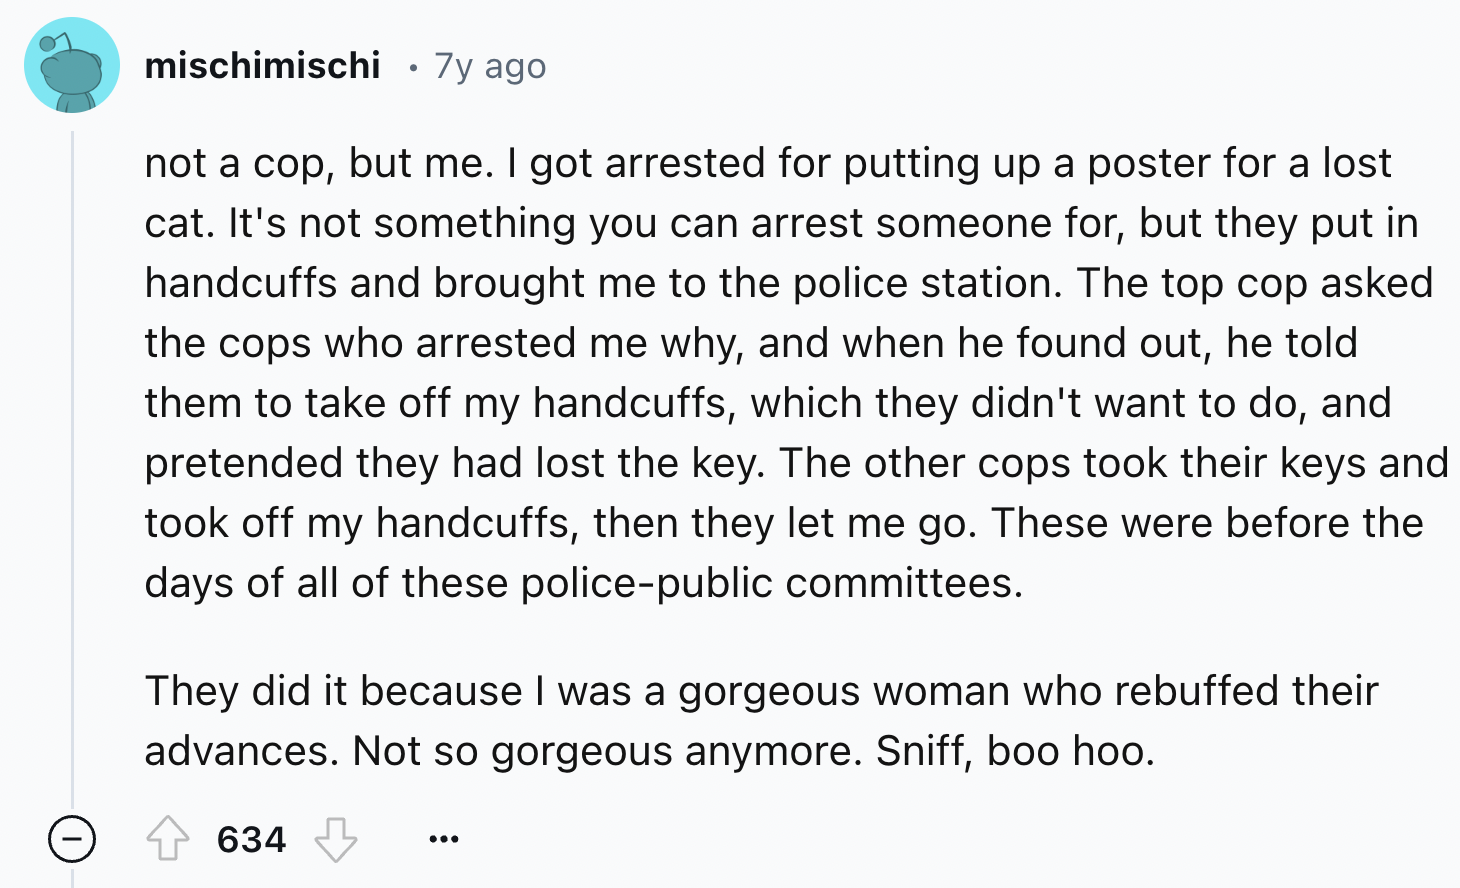 screenshot - mischimischi 7y ago . not a cop, but me. I got arrested for putting up a poster for a lost cat. It's not something you can arrest someone for, but they put in handcuffs and brought me to the police station. The top cop asked the cops who arre